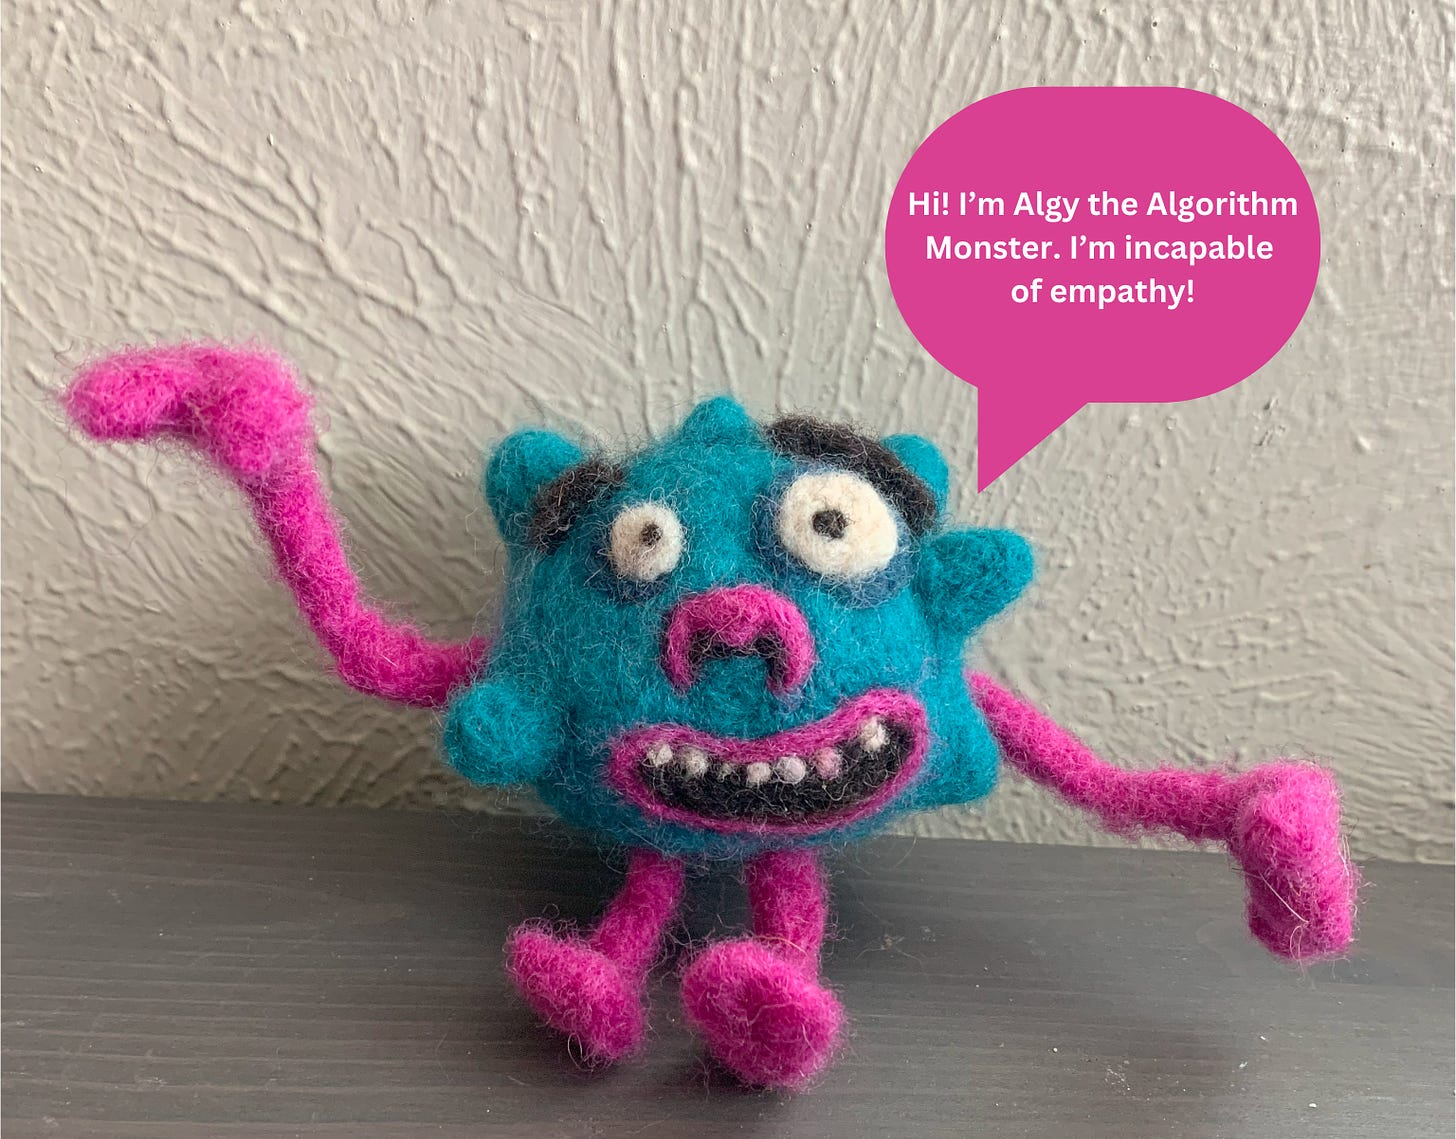 A pink and blue googly eyed monster made of felt with a speech bubble that reads: "Hi! I'm Algy the Algorithm Monster. I'm incapable of empathy!"